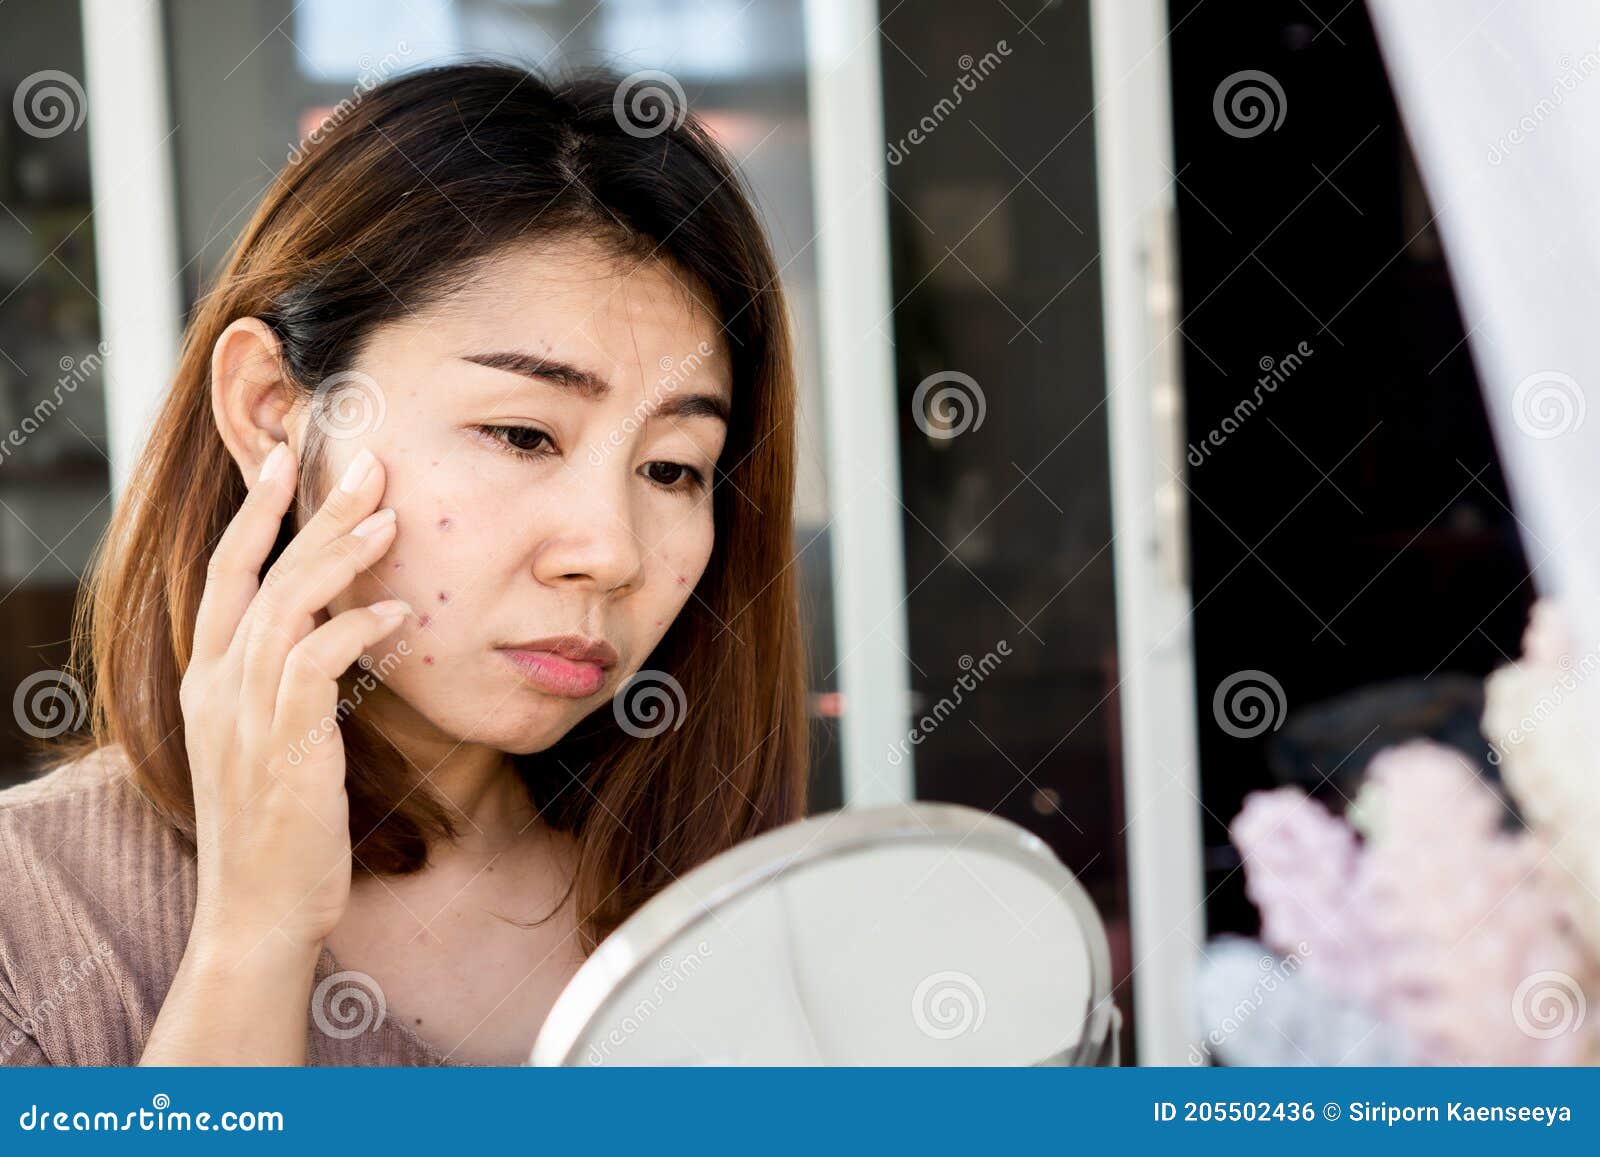 asian woman checking her face skin problem with acne scar, dark spot on mirror